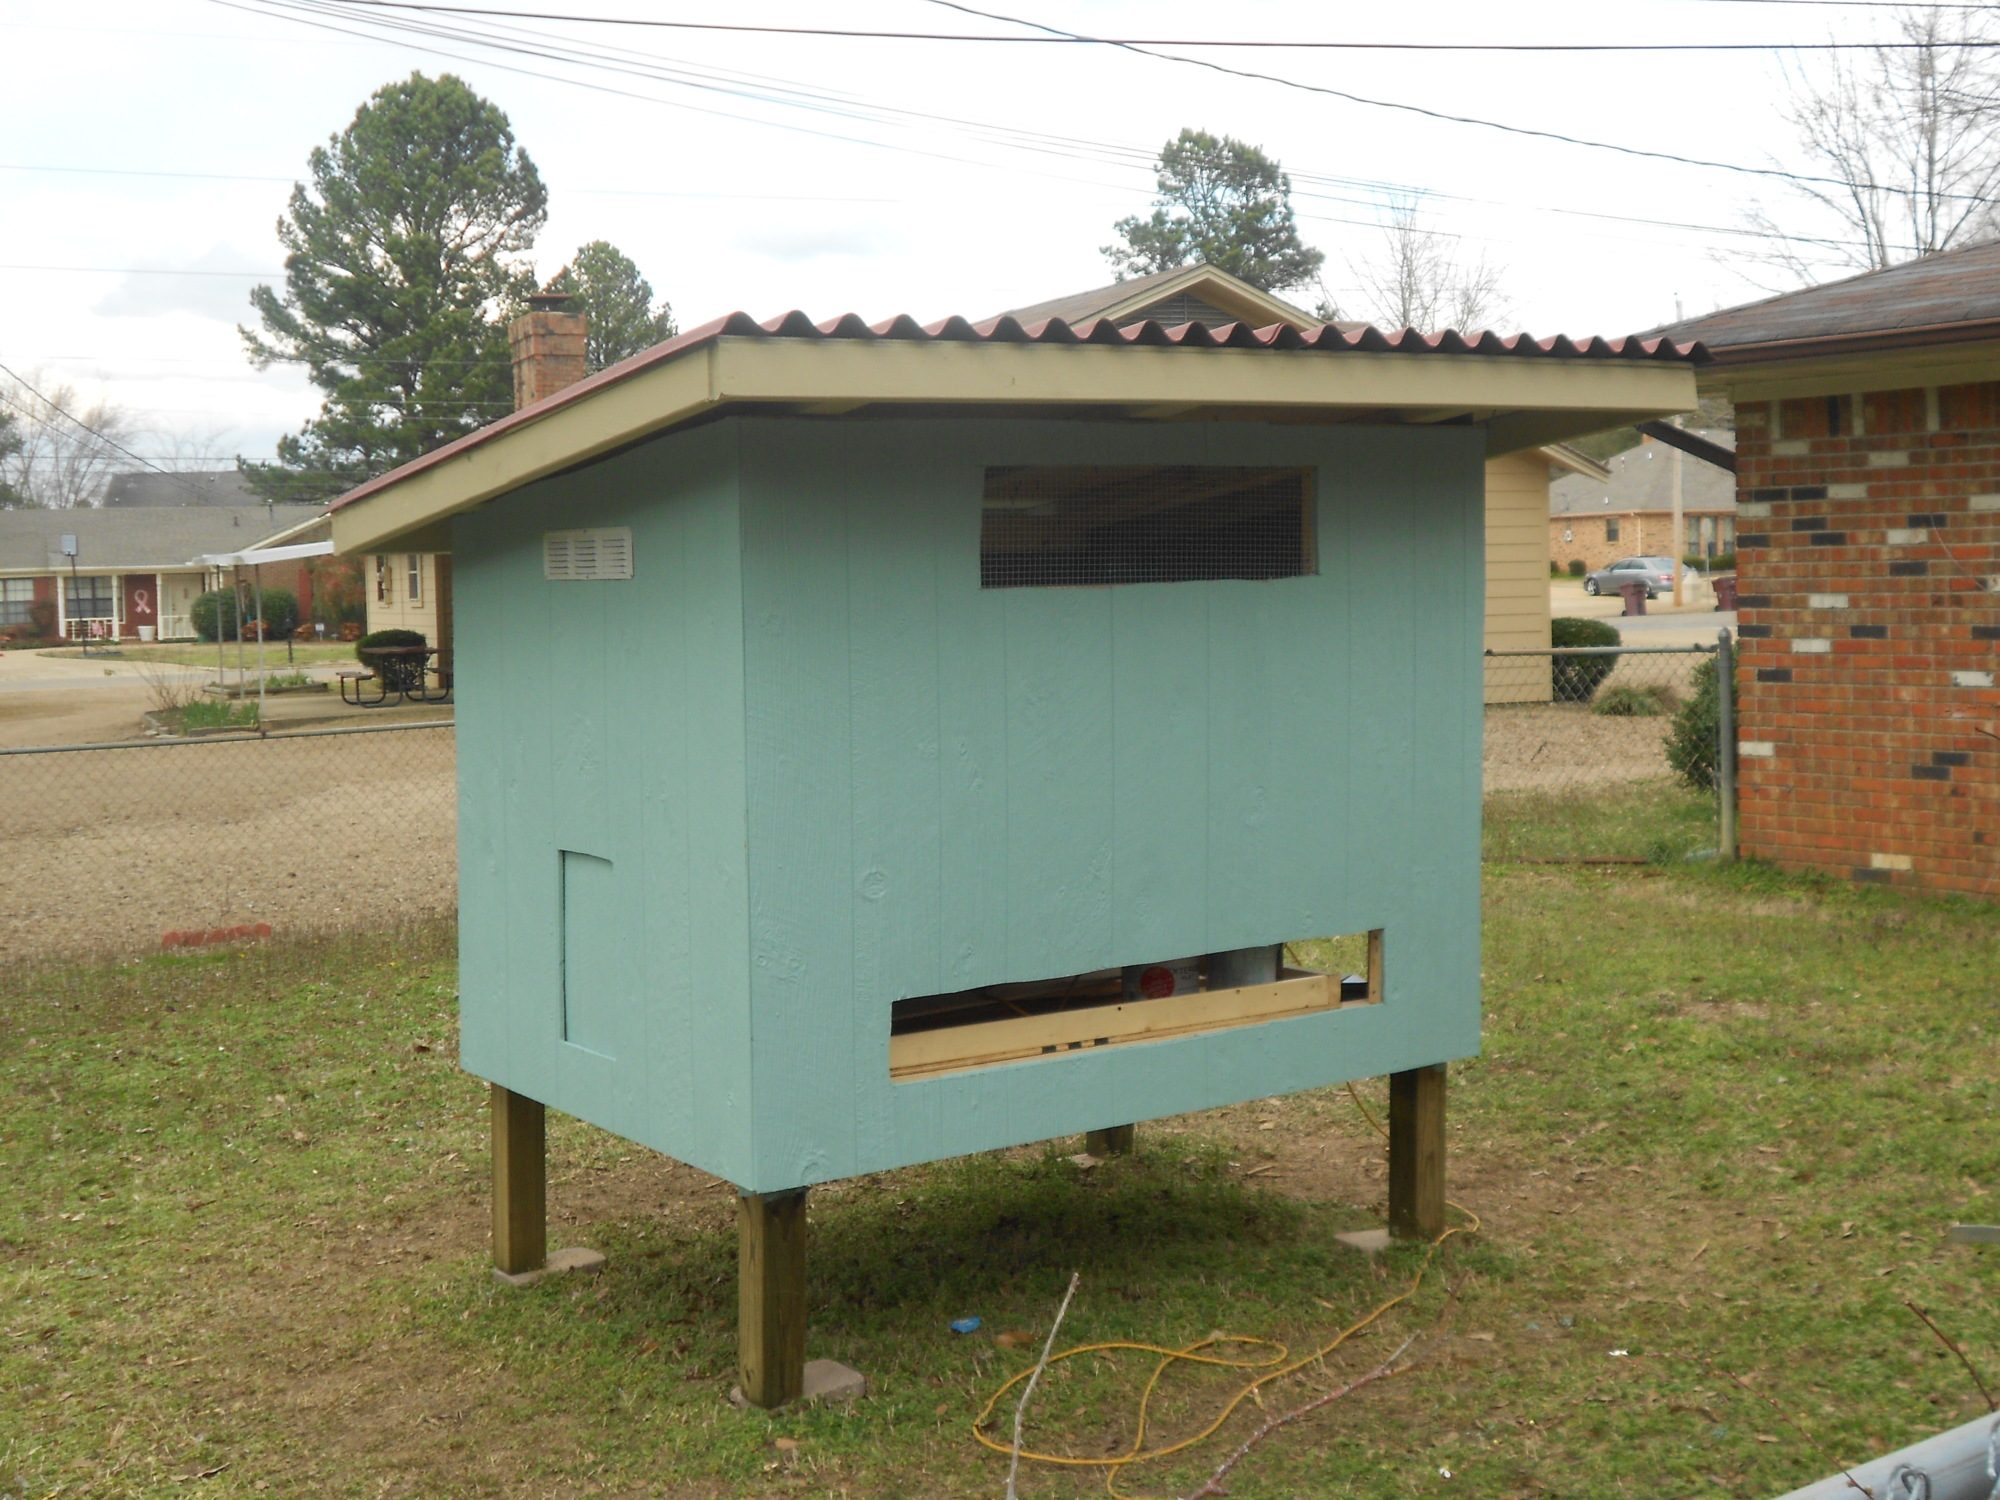  FREE chicken coop plan (nice one too) on the Purina Mills Website